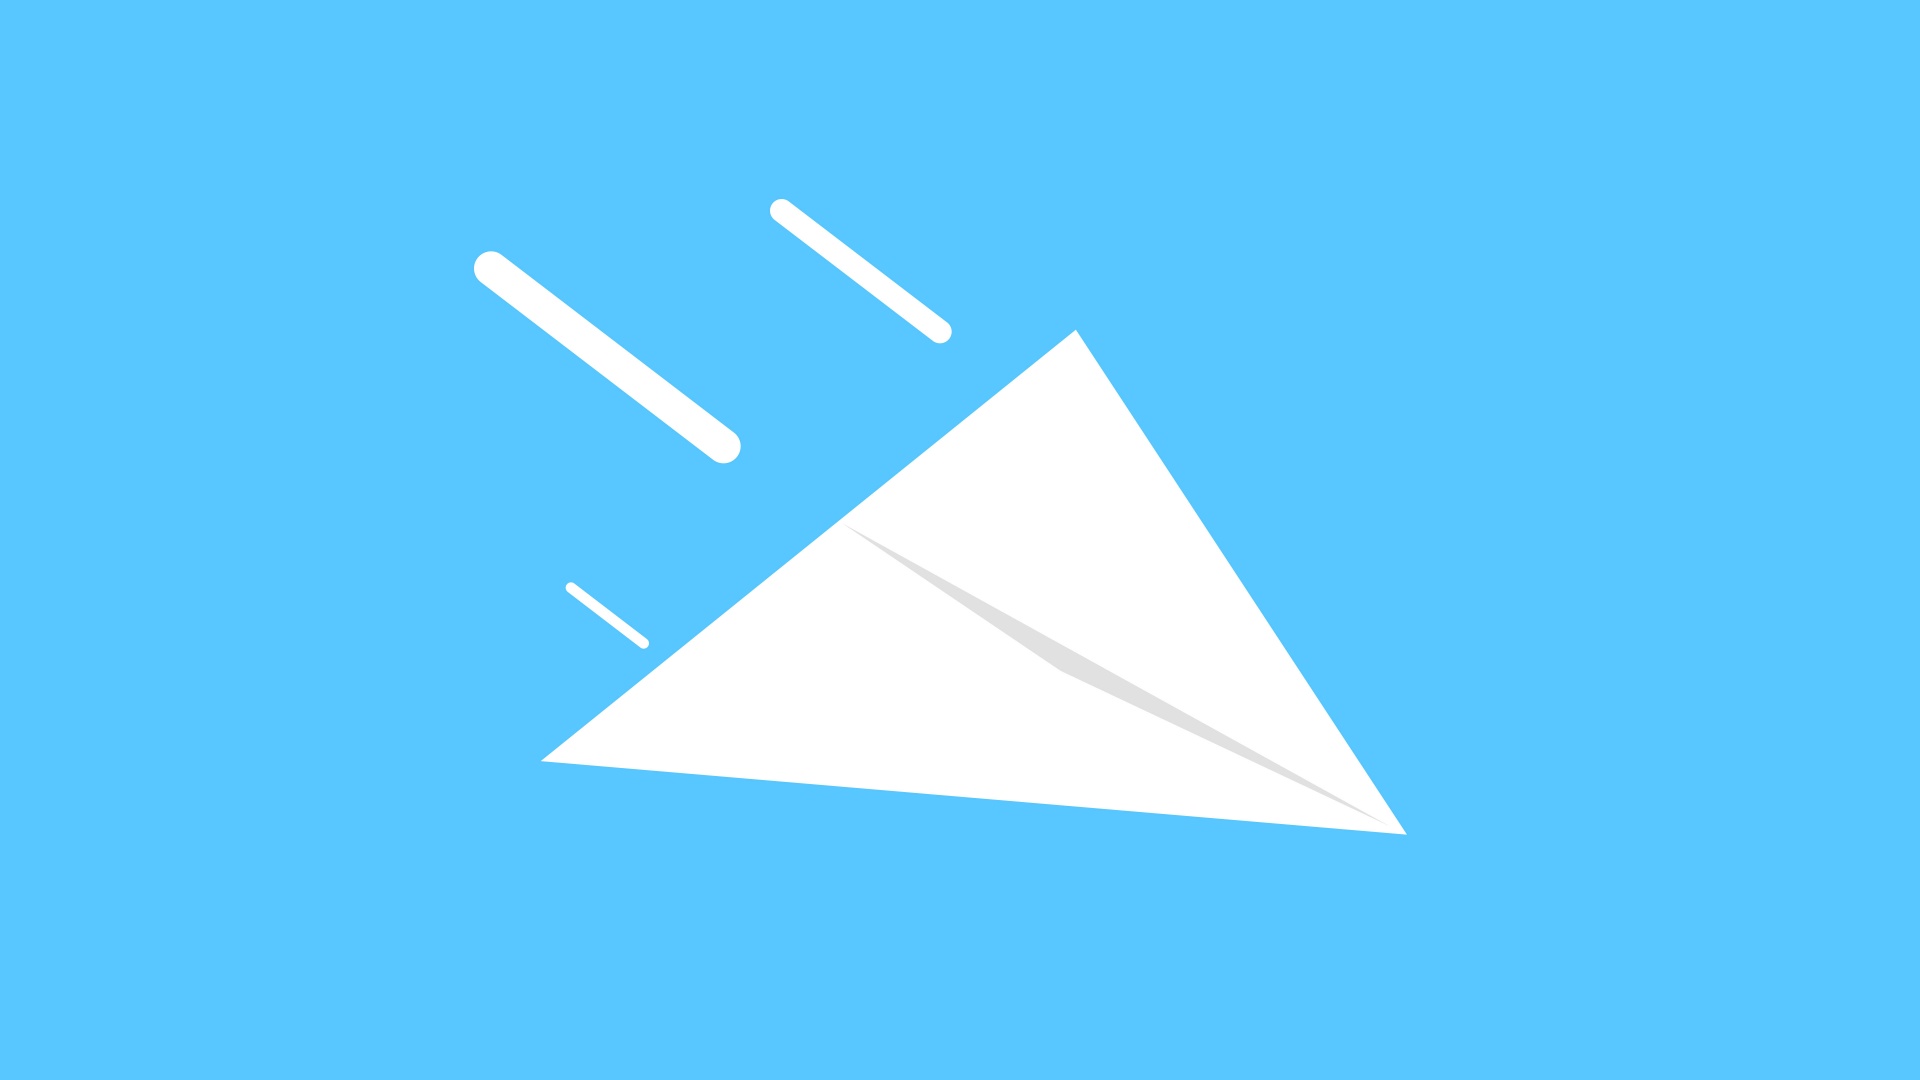 Flying Paper Airplane